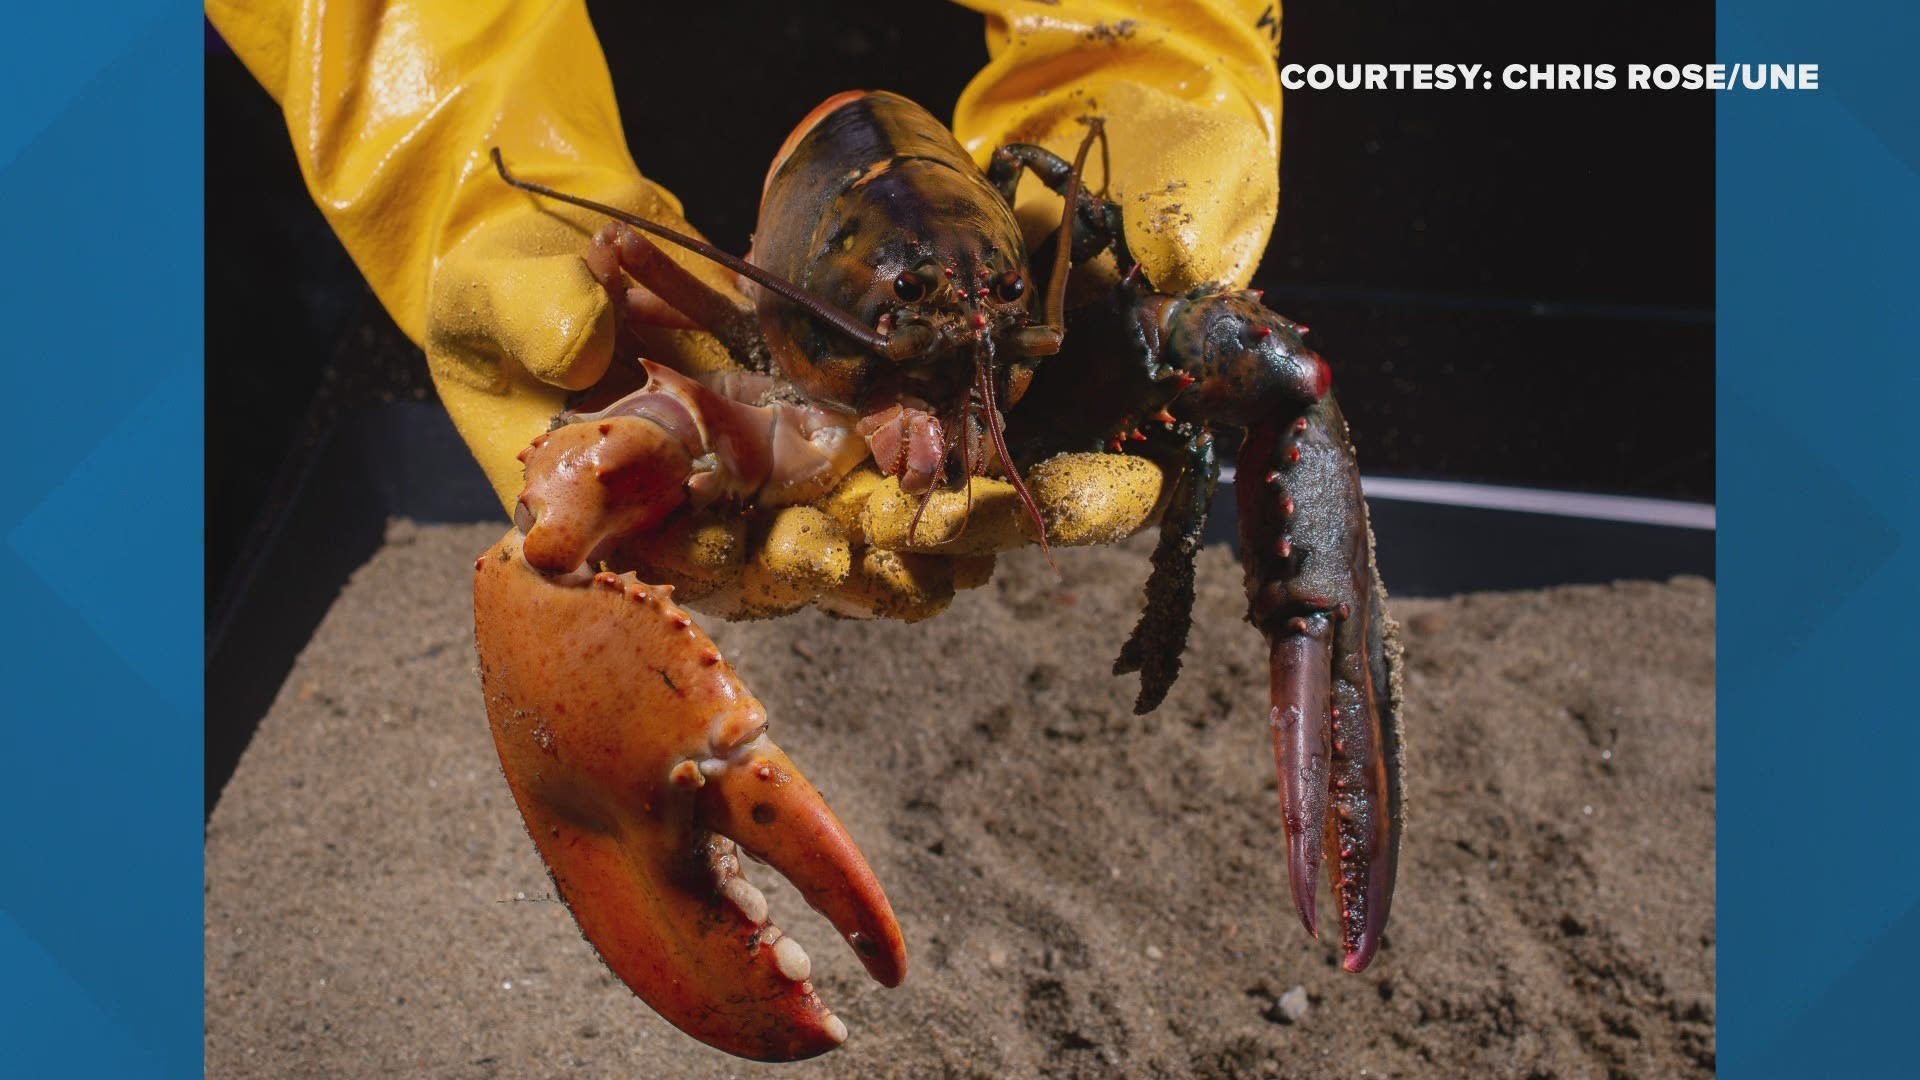 The Inland Seafood Corporation donated the split-colored lobster last week.